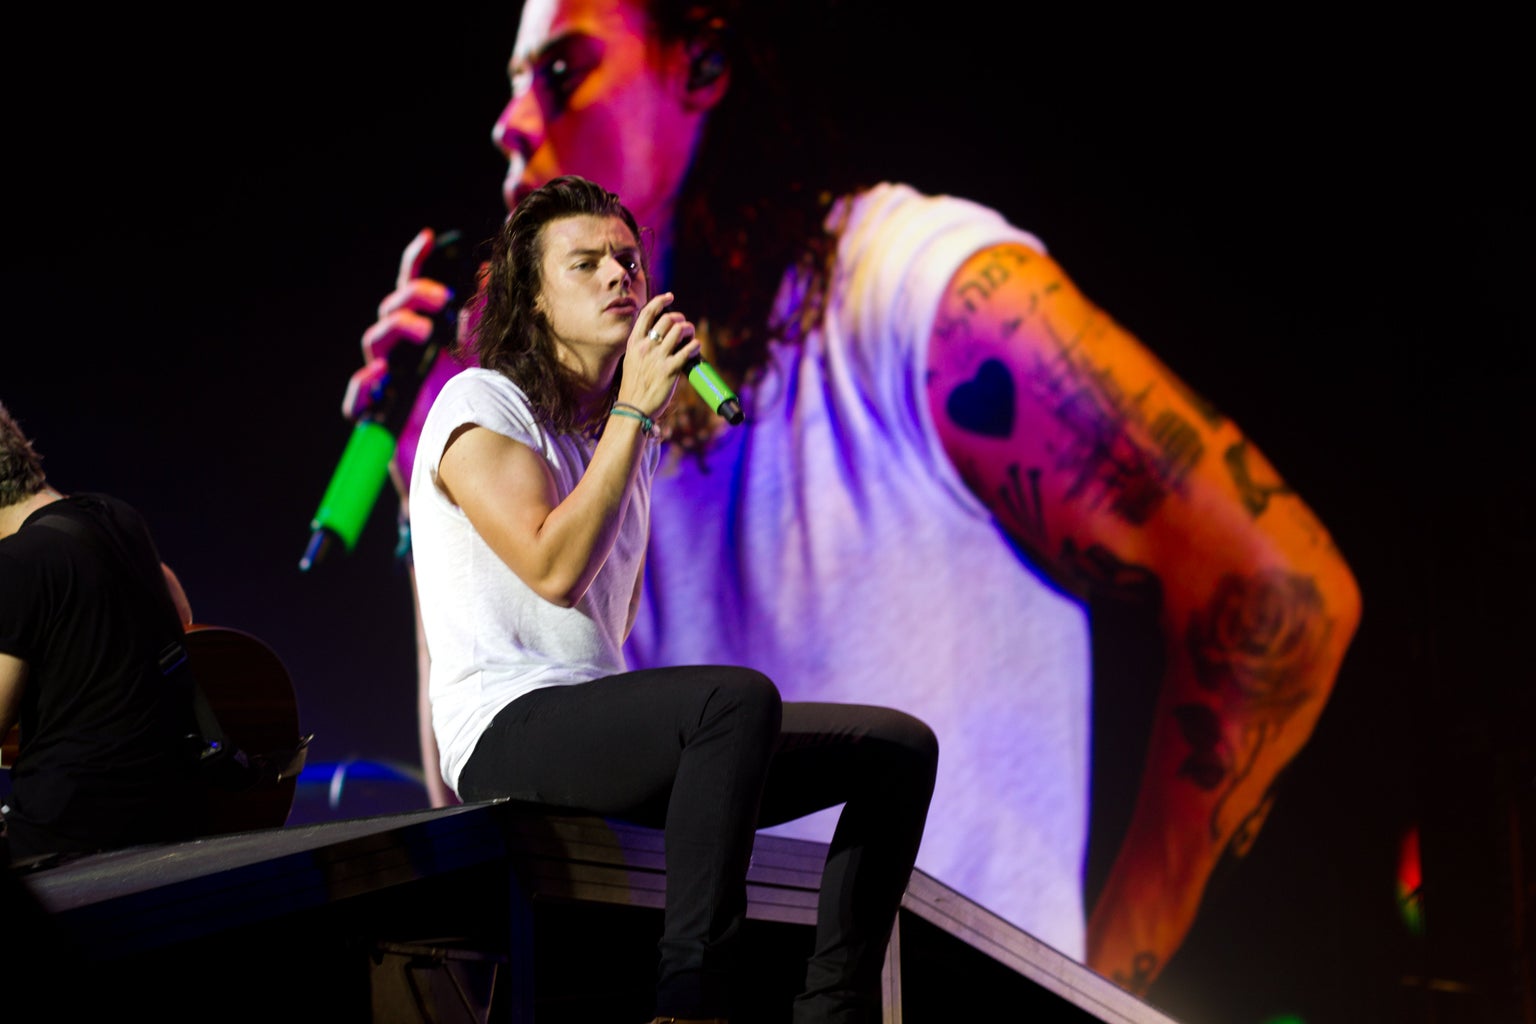 Harry Styles singing on stage